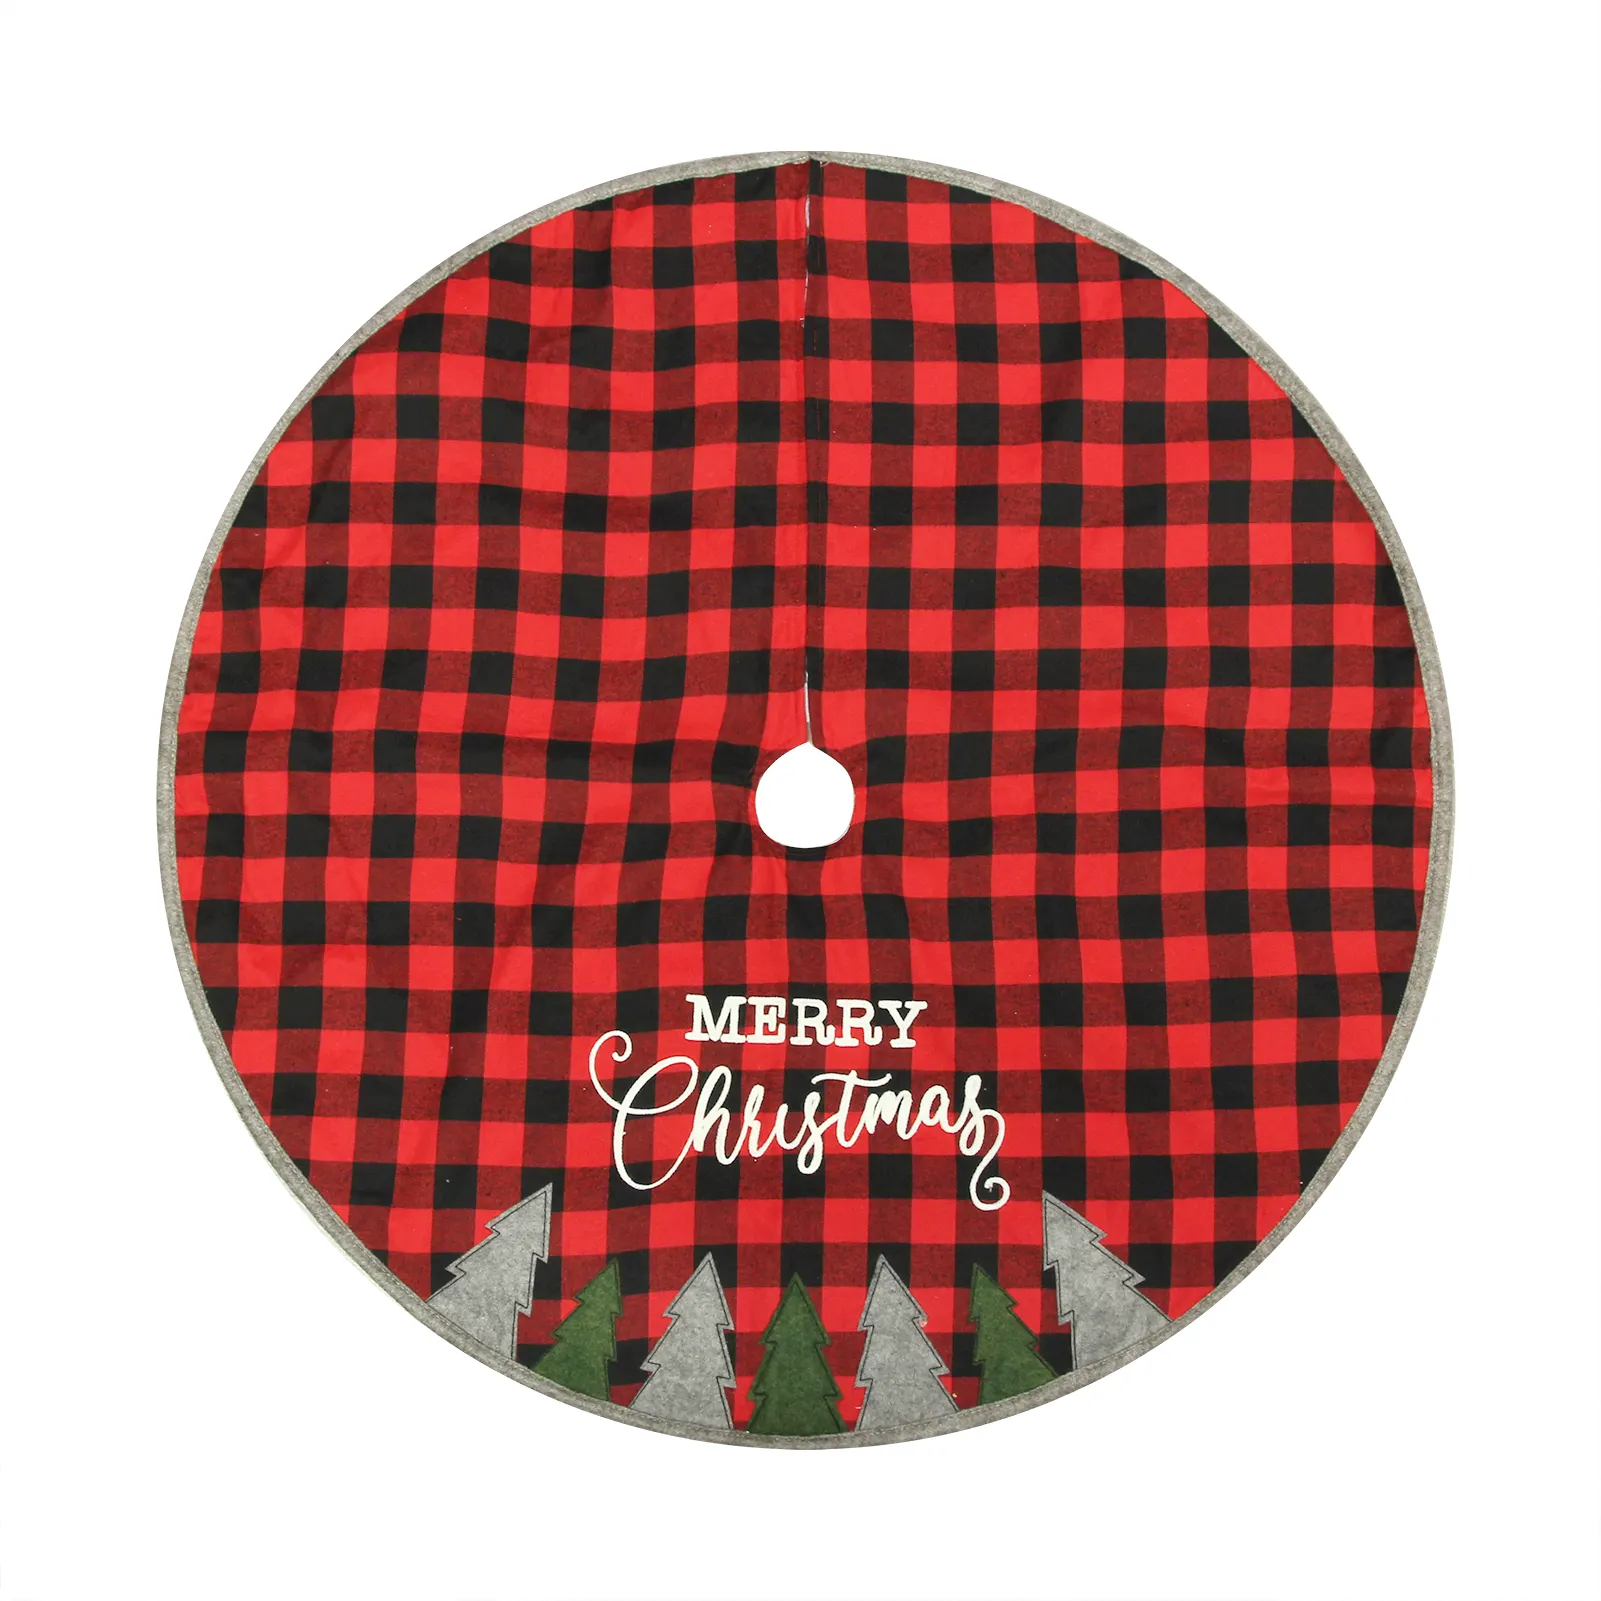 48" Factory selling Christmas Tree Cloth Decorations Red Black Plaid Cotton Embroidery Christmas Tree Skirt